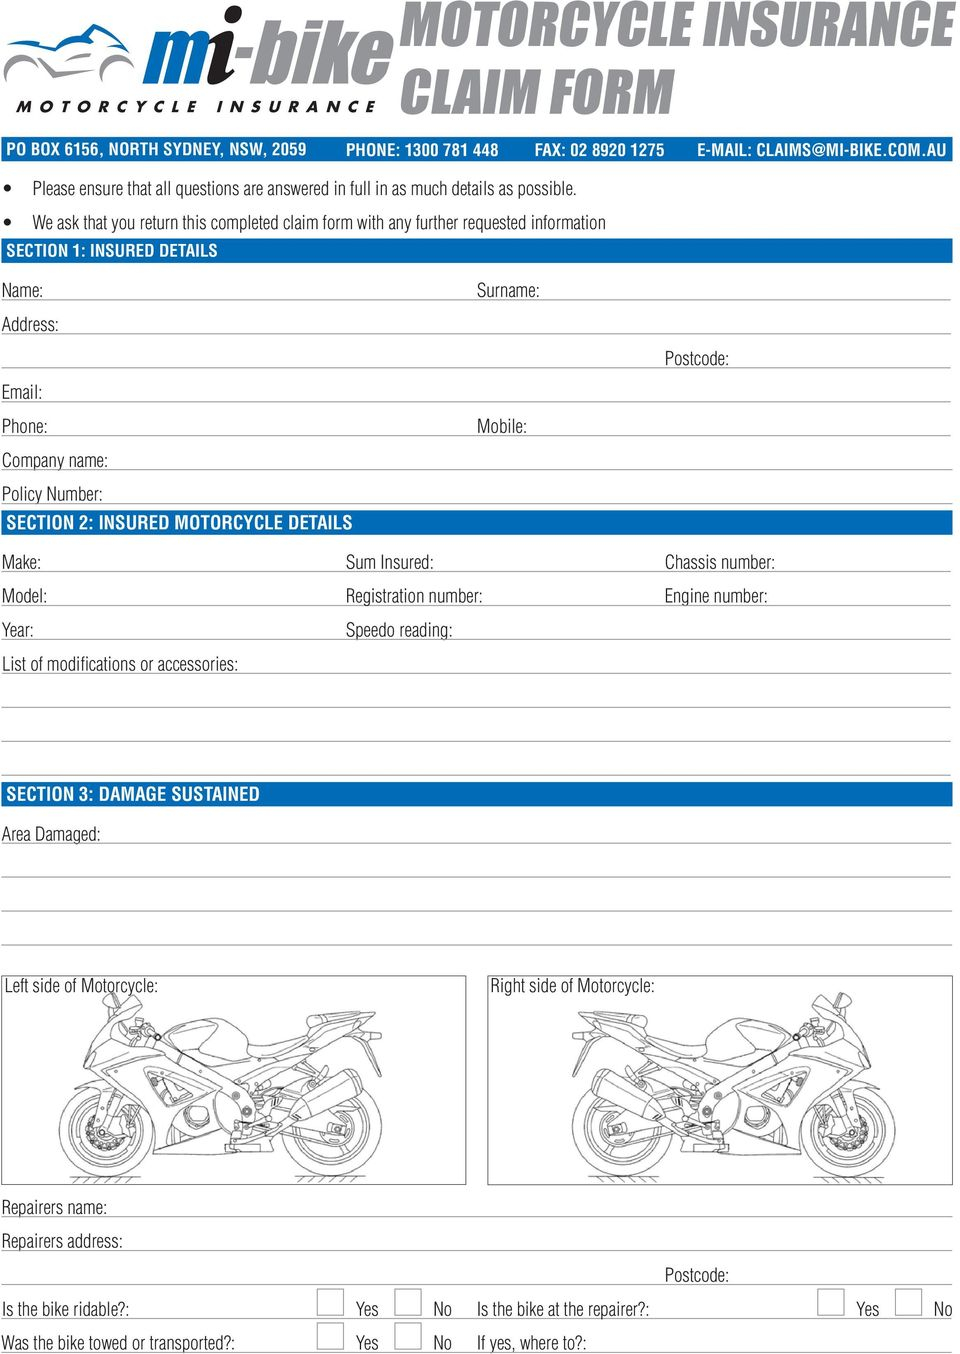 Motorcycle Insurance Claim Form Pdf Free Download within size 960 X 1354